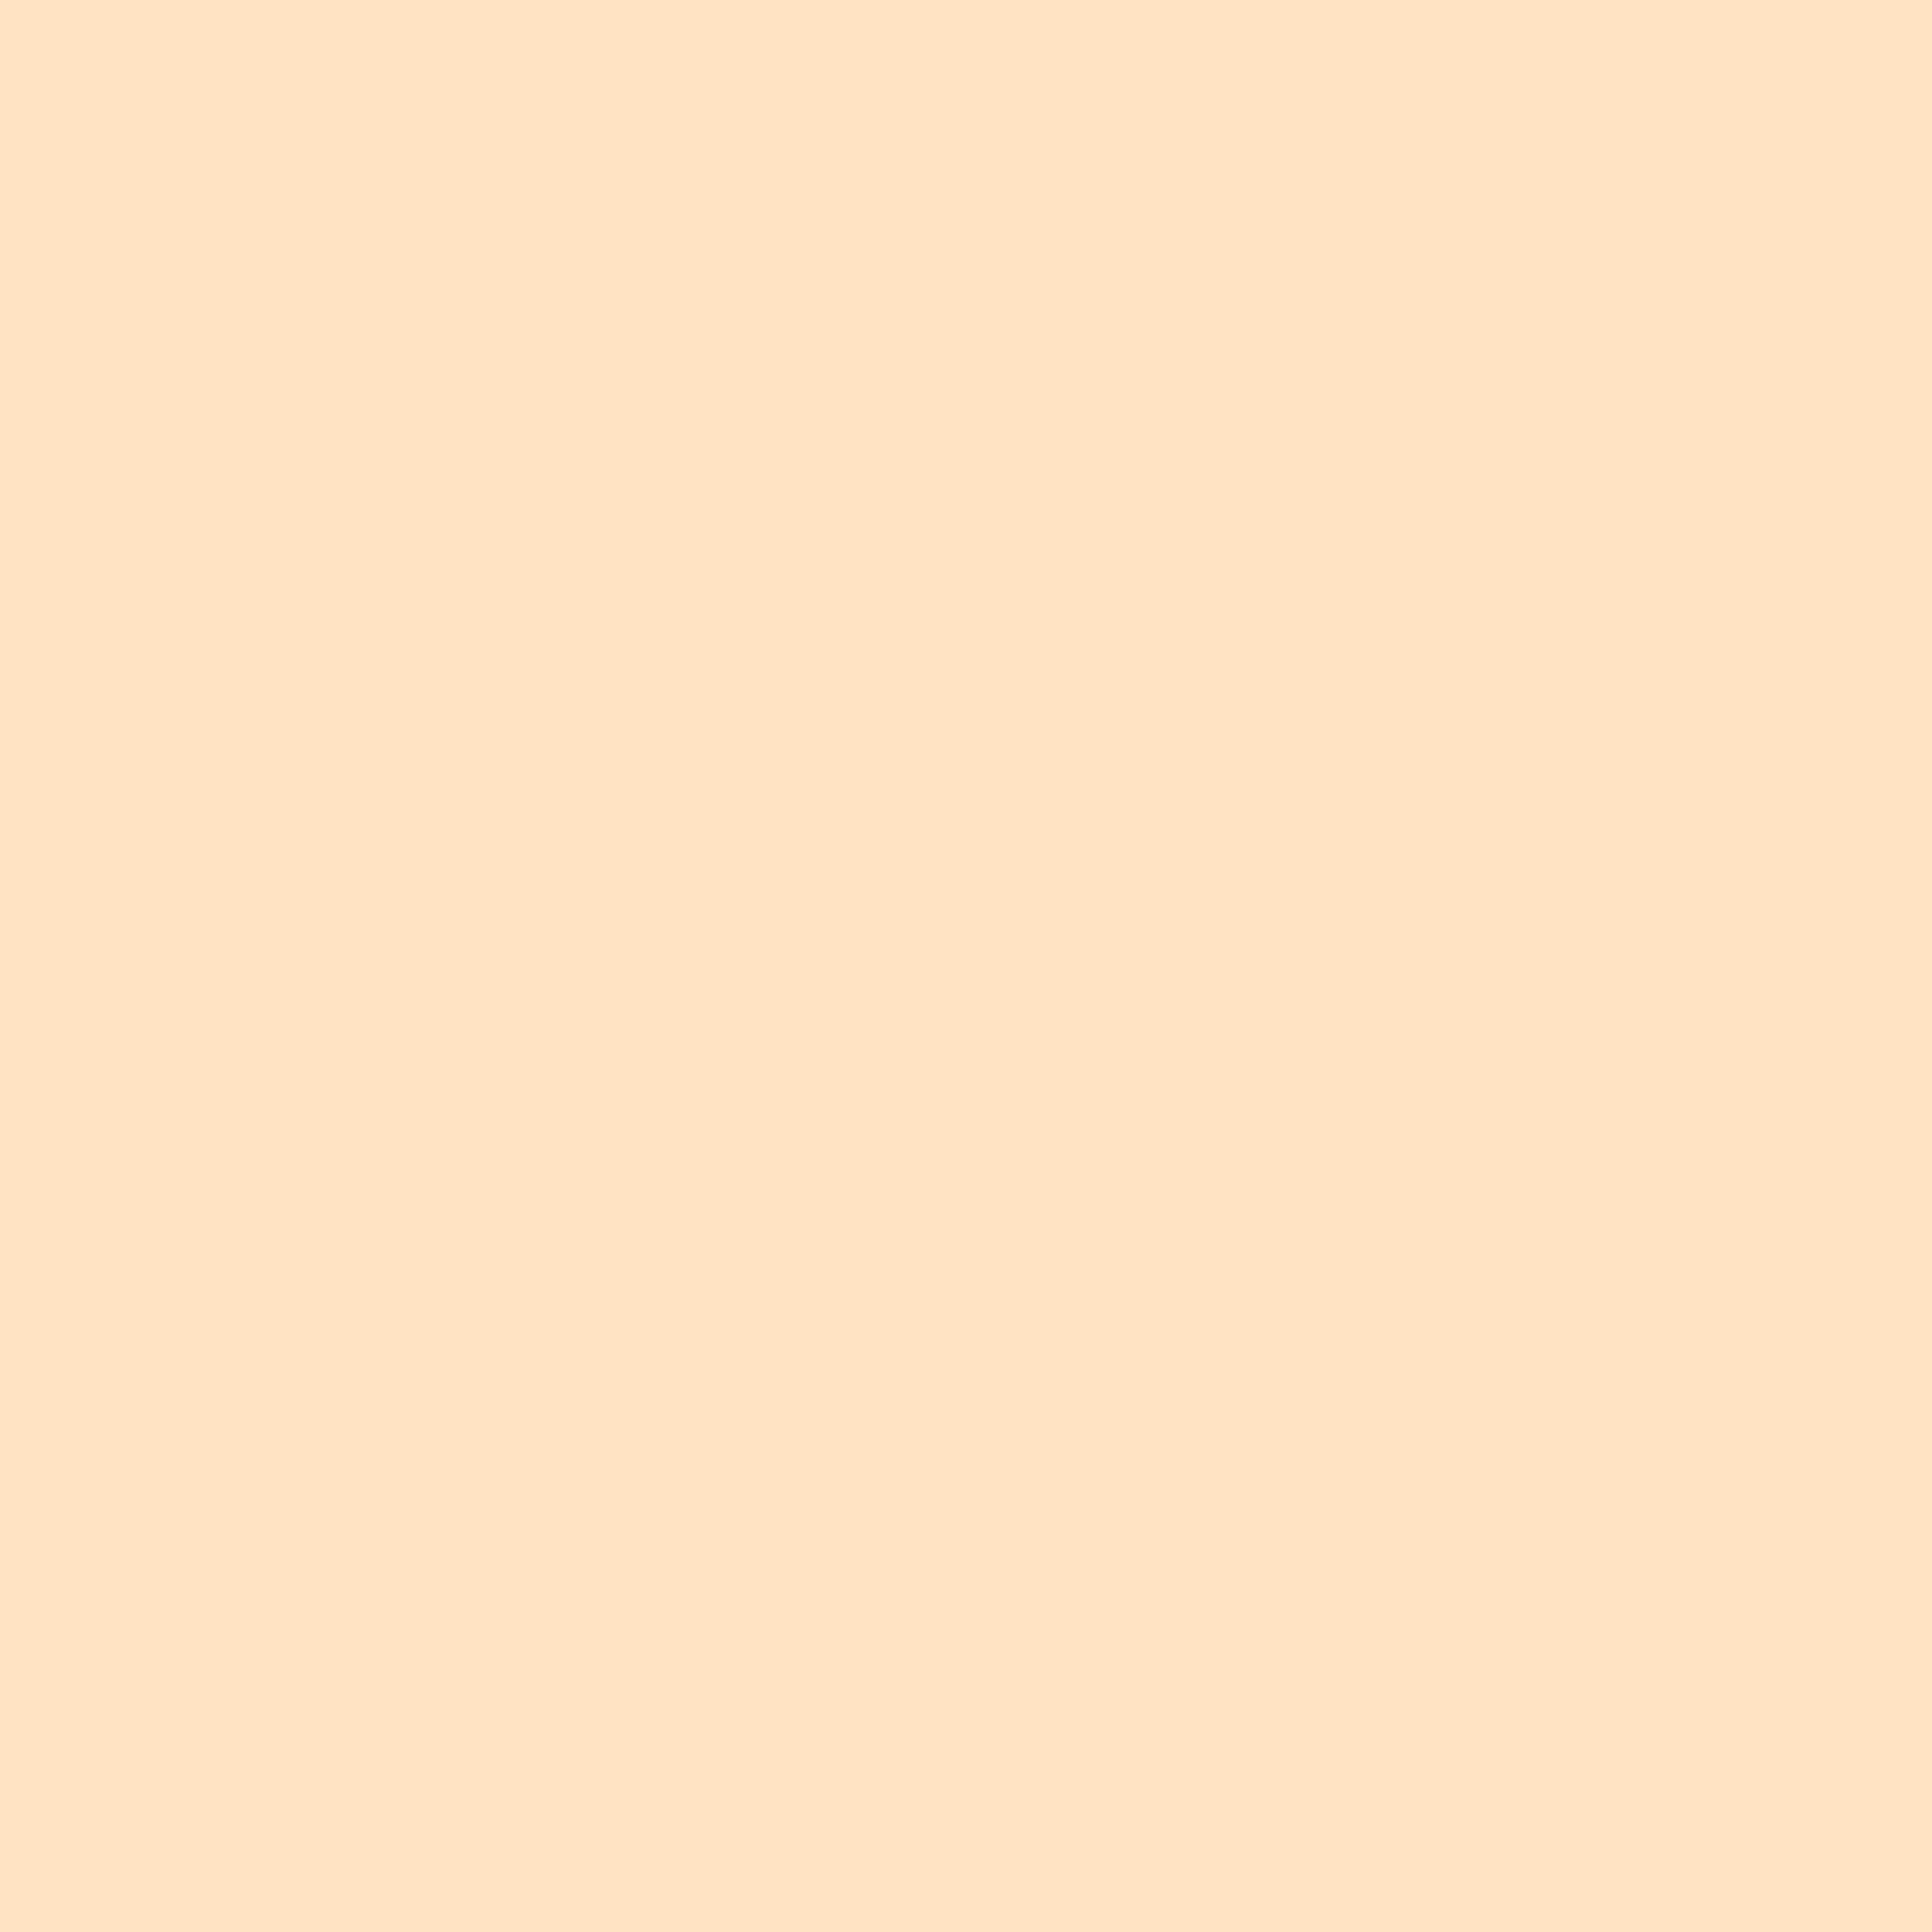 2732x2732 Bisque Solid Color Background